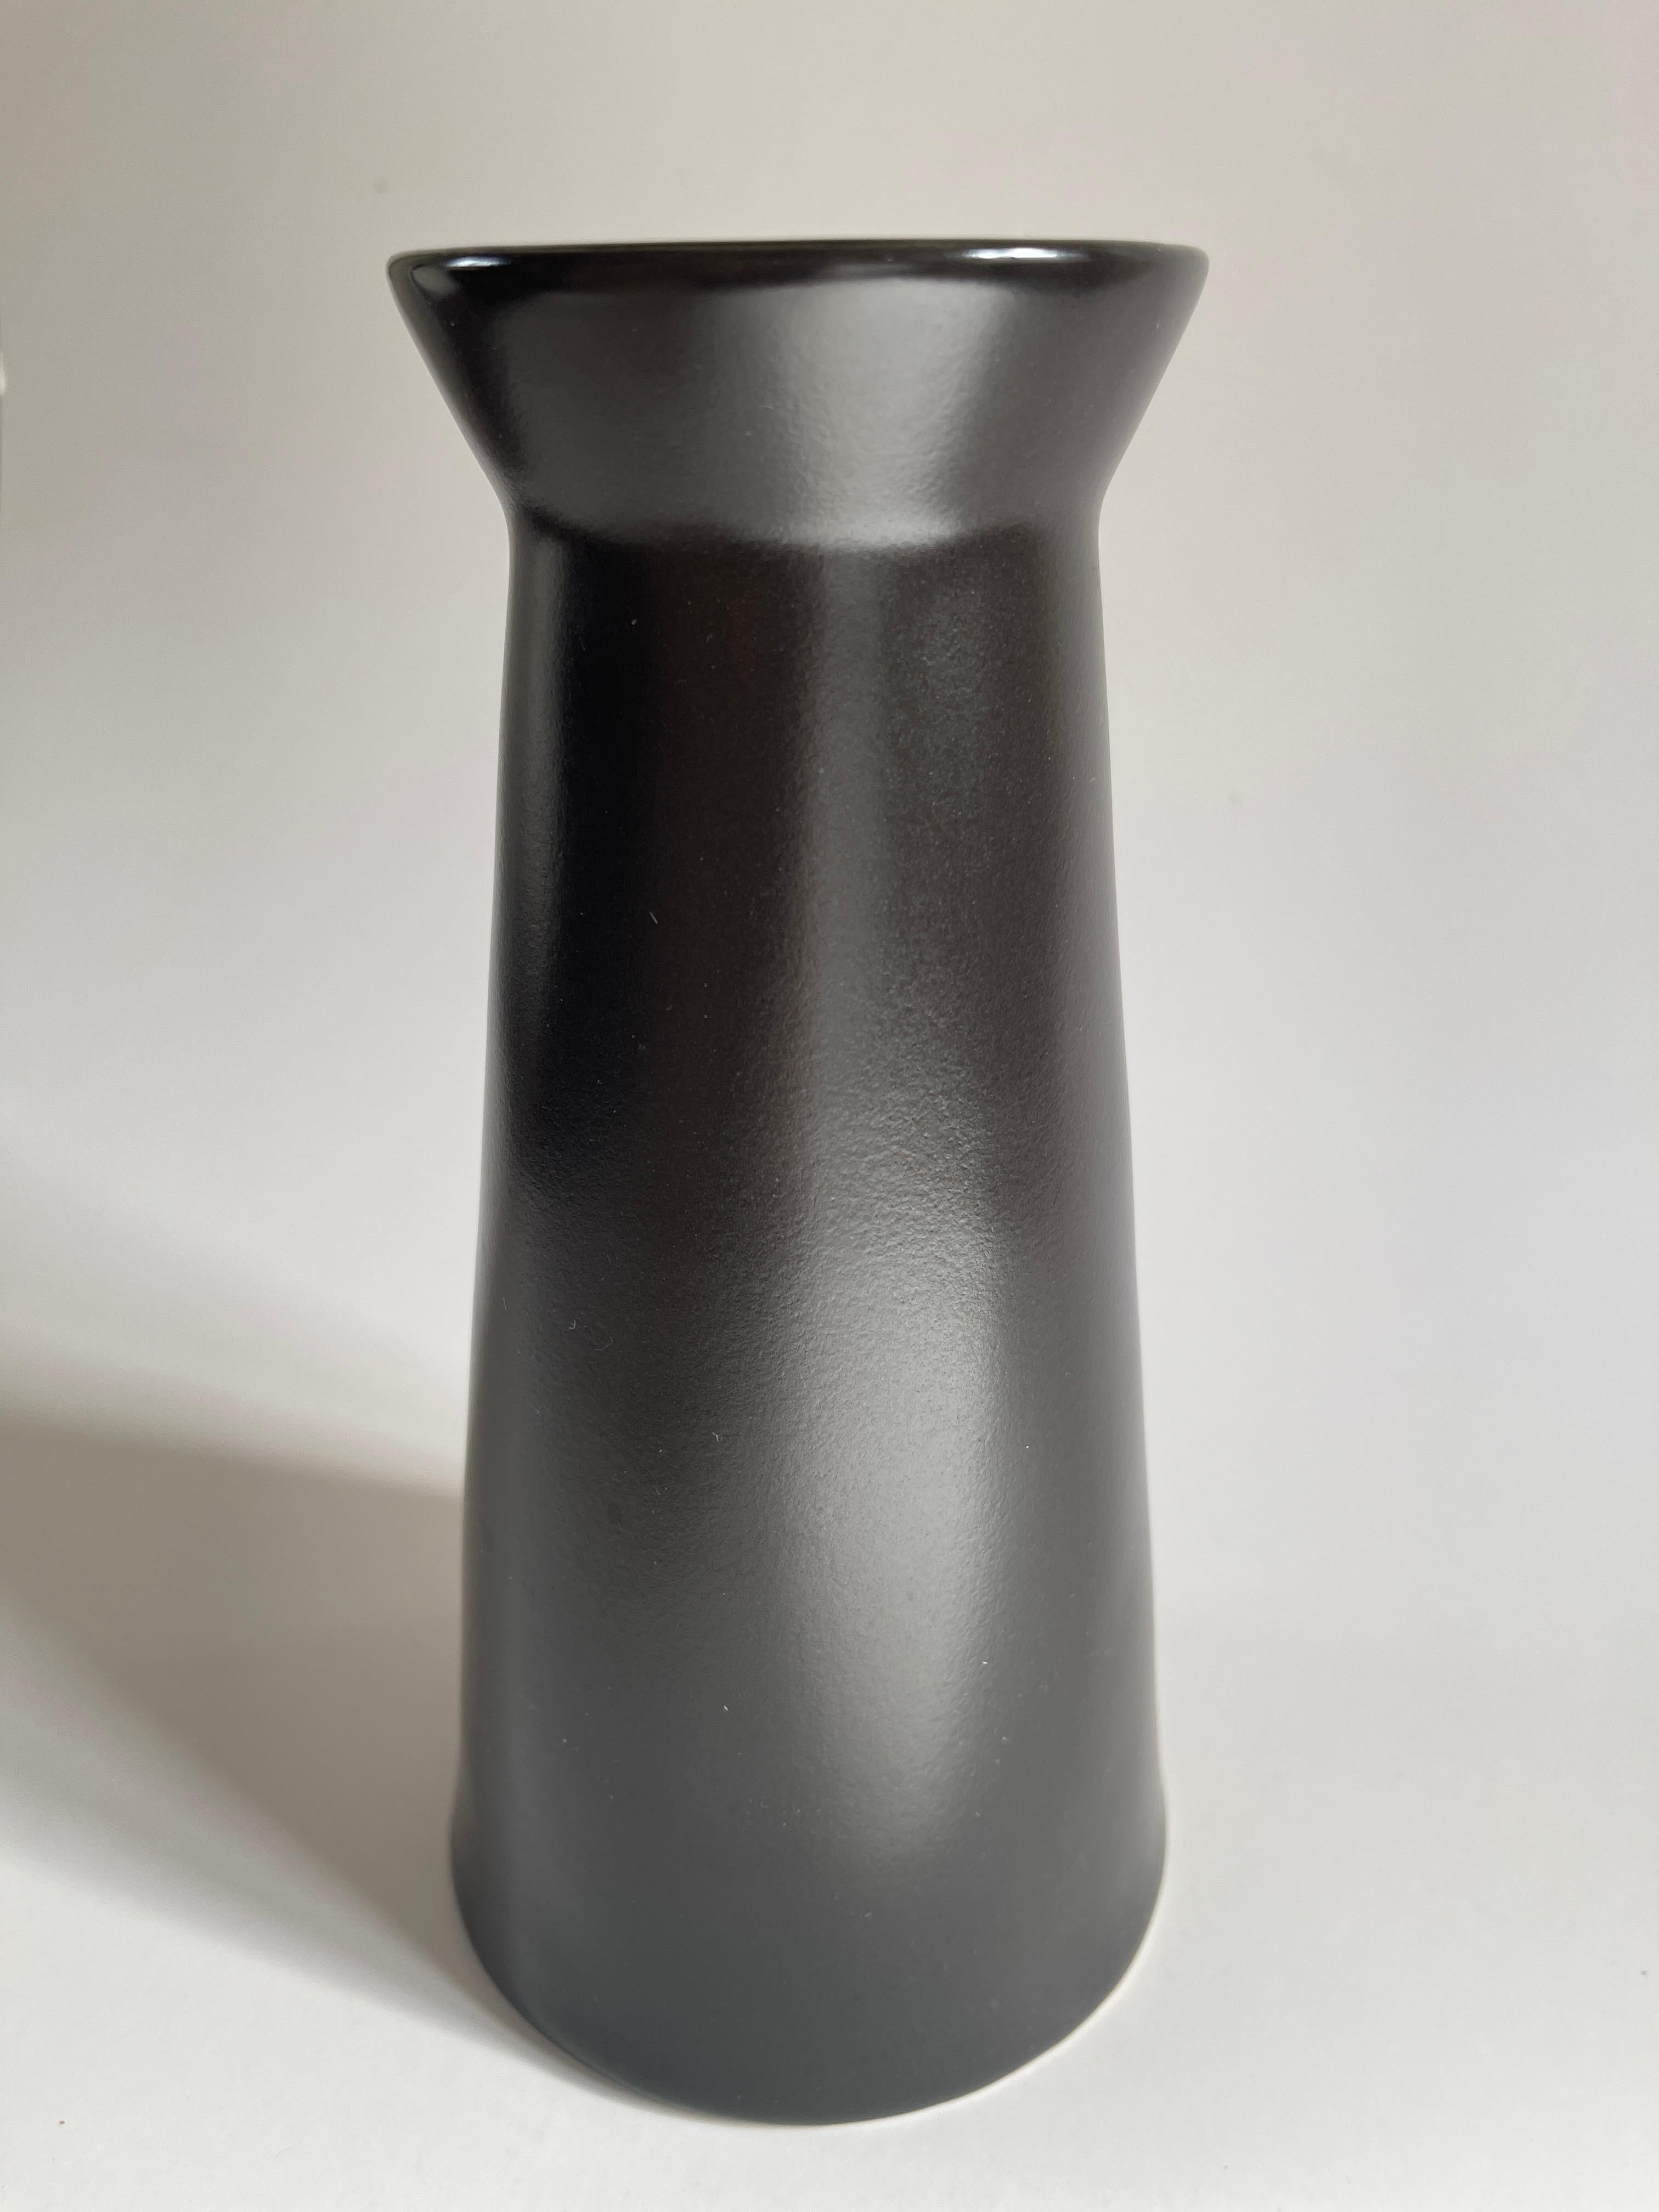 Pair of Swedish modern black matte glaze stoneware vases with Japanese inspired open mouth form. Sweden, c. 1990's.